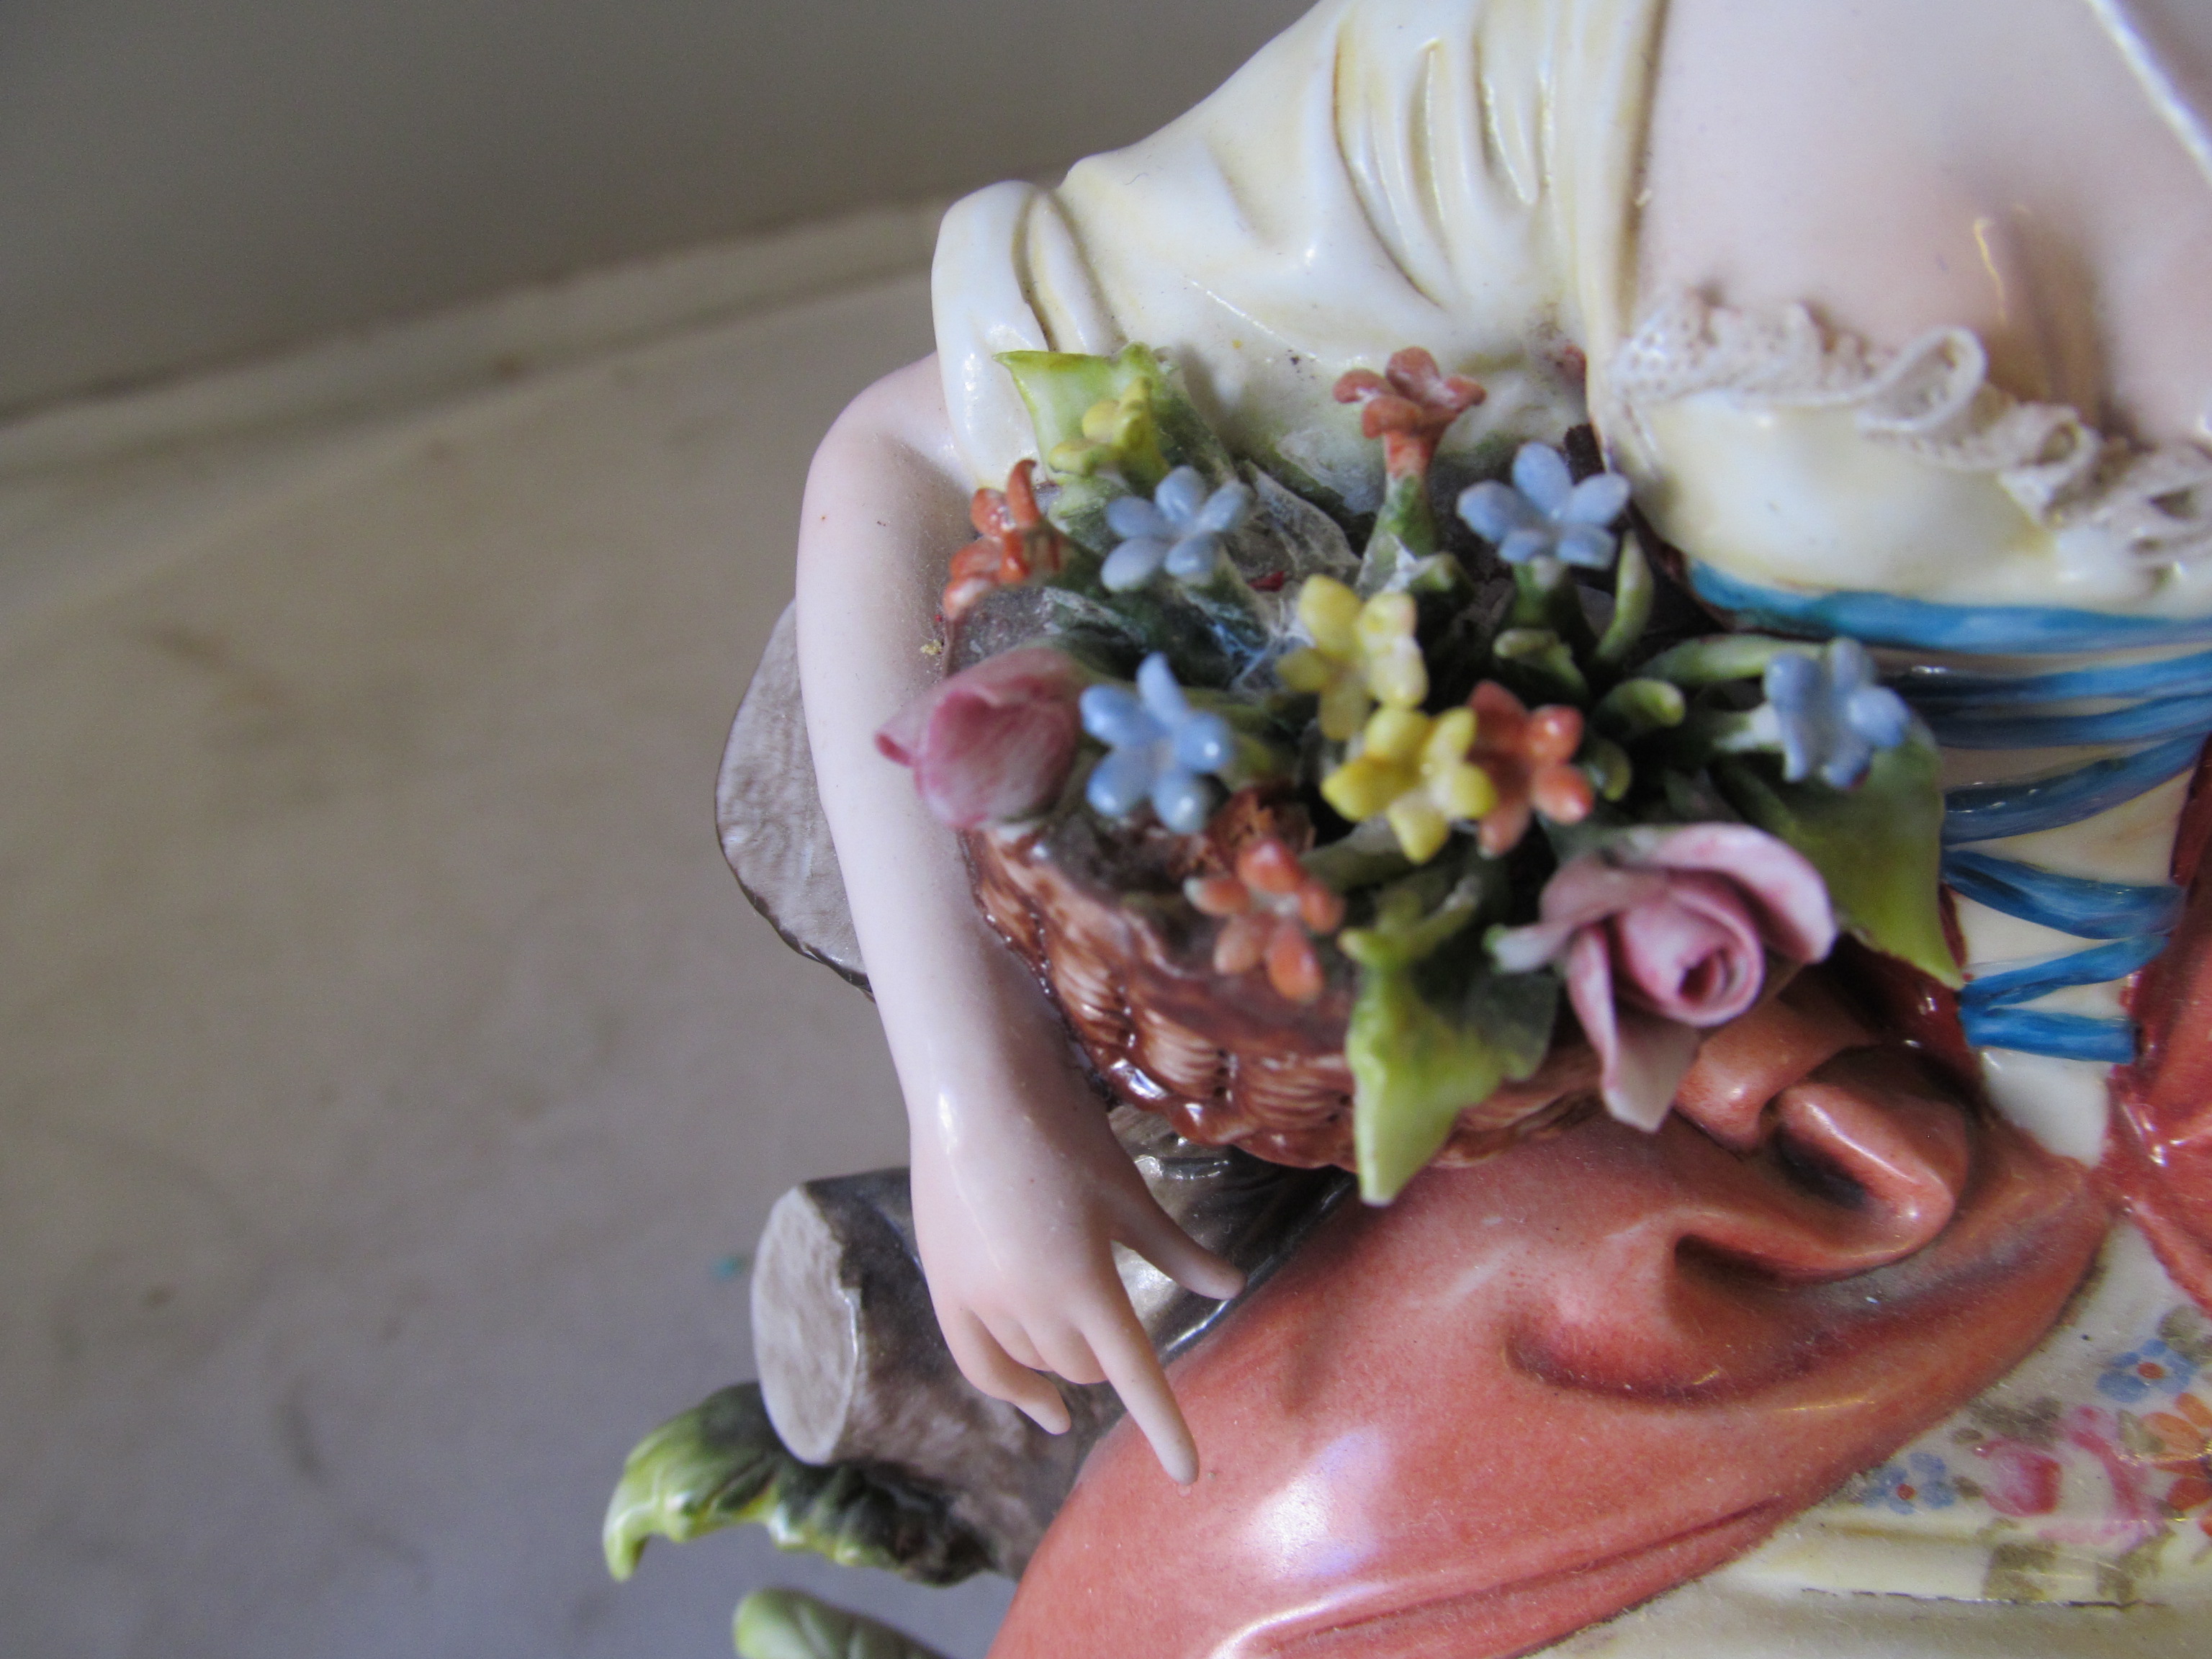 A Capodimonte figure lady with basket of flowers holding a dove - Image 3 of 22